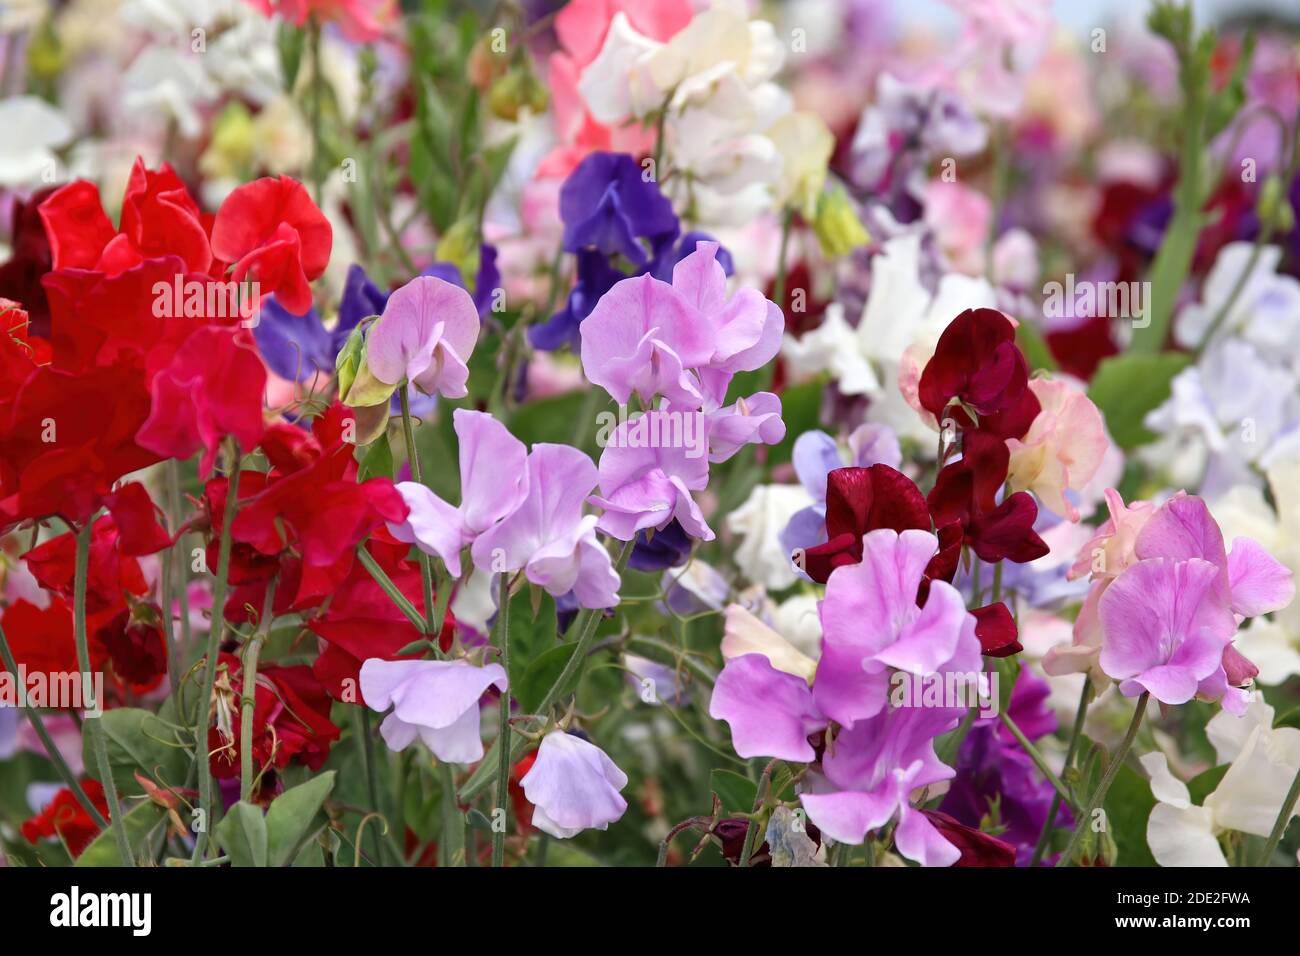 Field of beautiful  sweet peas flowers in pink, red, white and burgundy Stock Photo